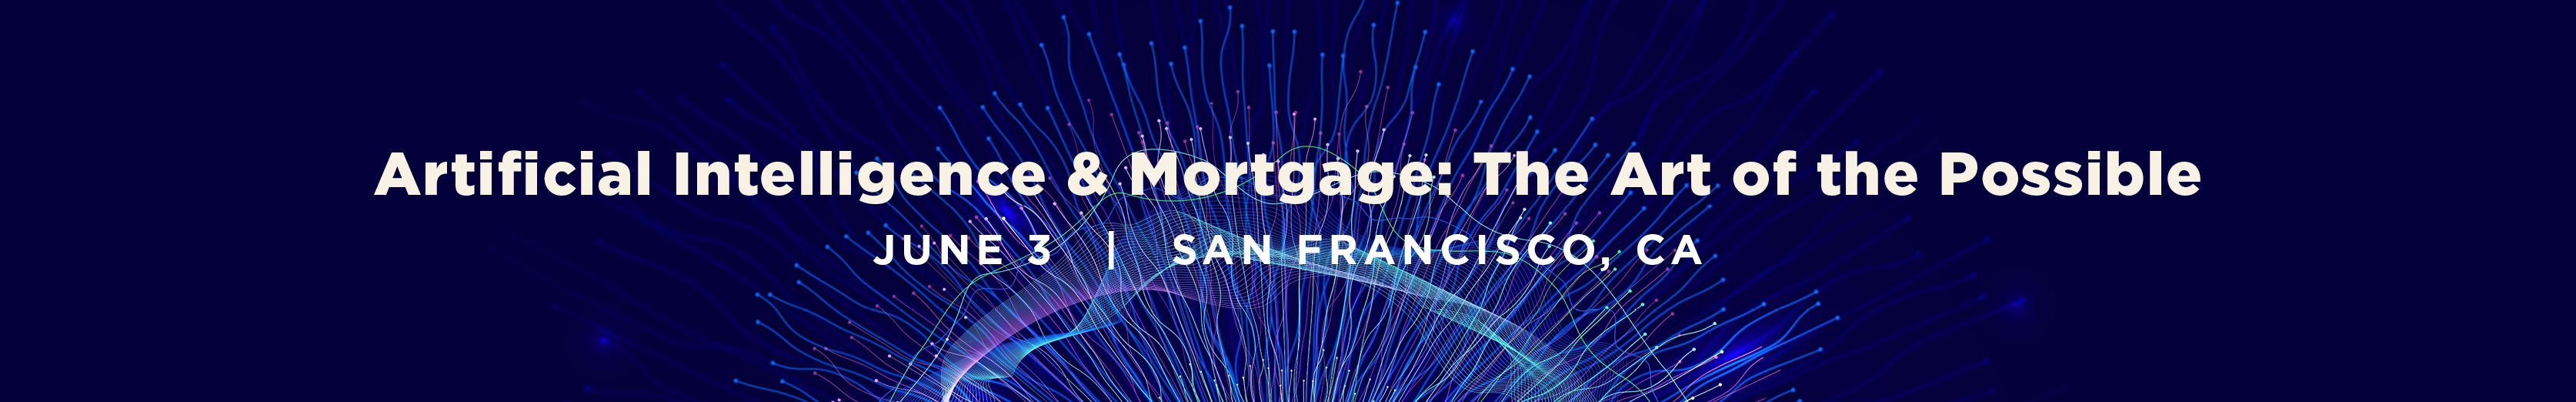 Header - Artificial Intelligence & Mortgage: The Art of the Possible